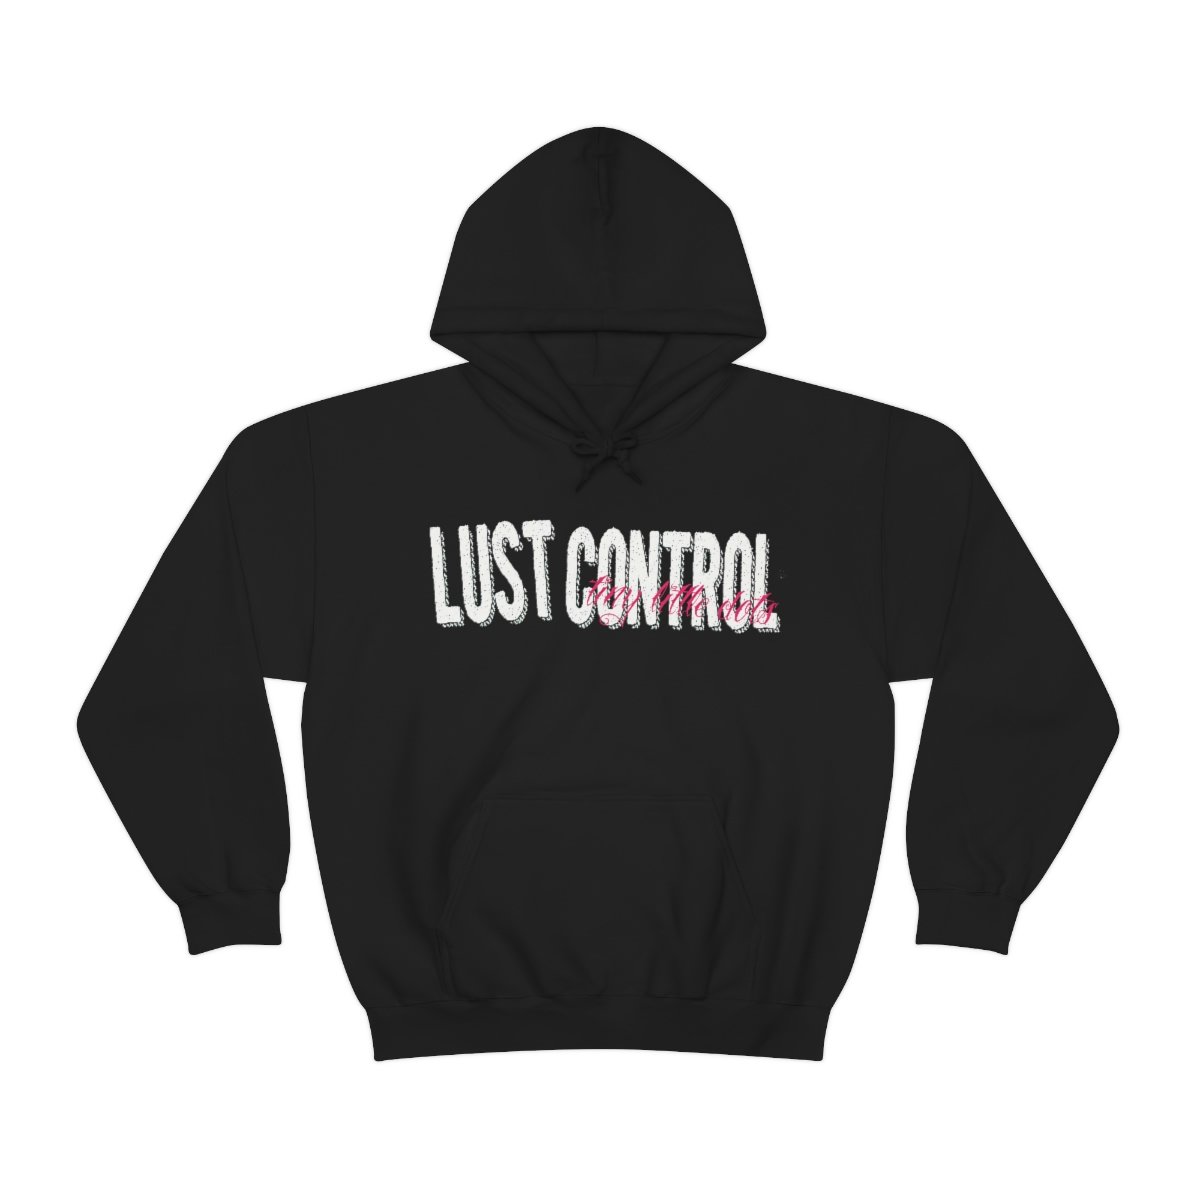 Lust Control – Tiny Little Dots Logo Pullover Hooded Sweatshirt